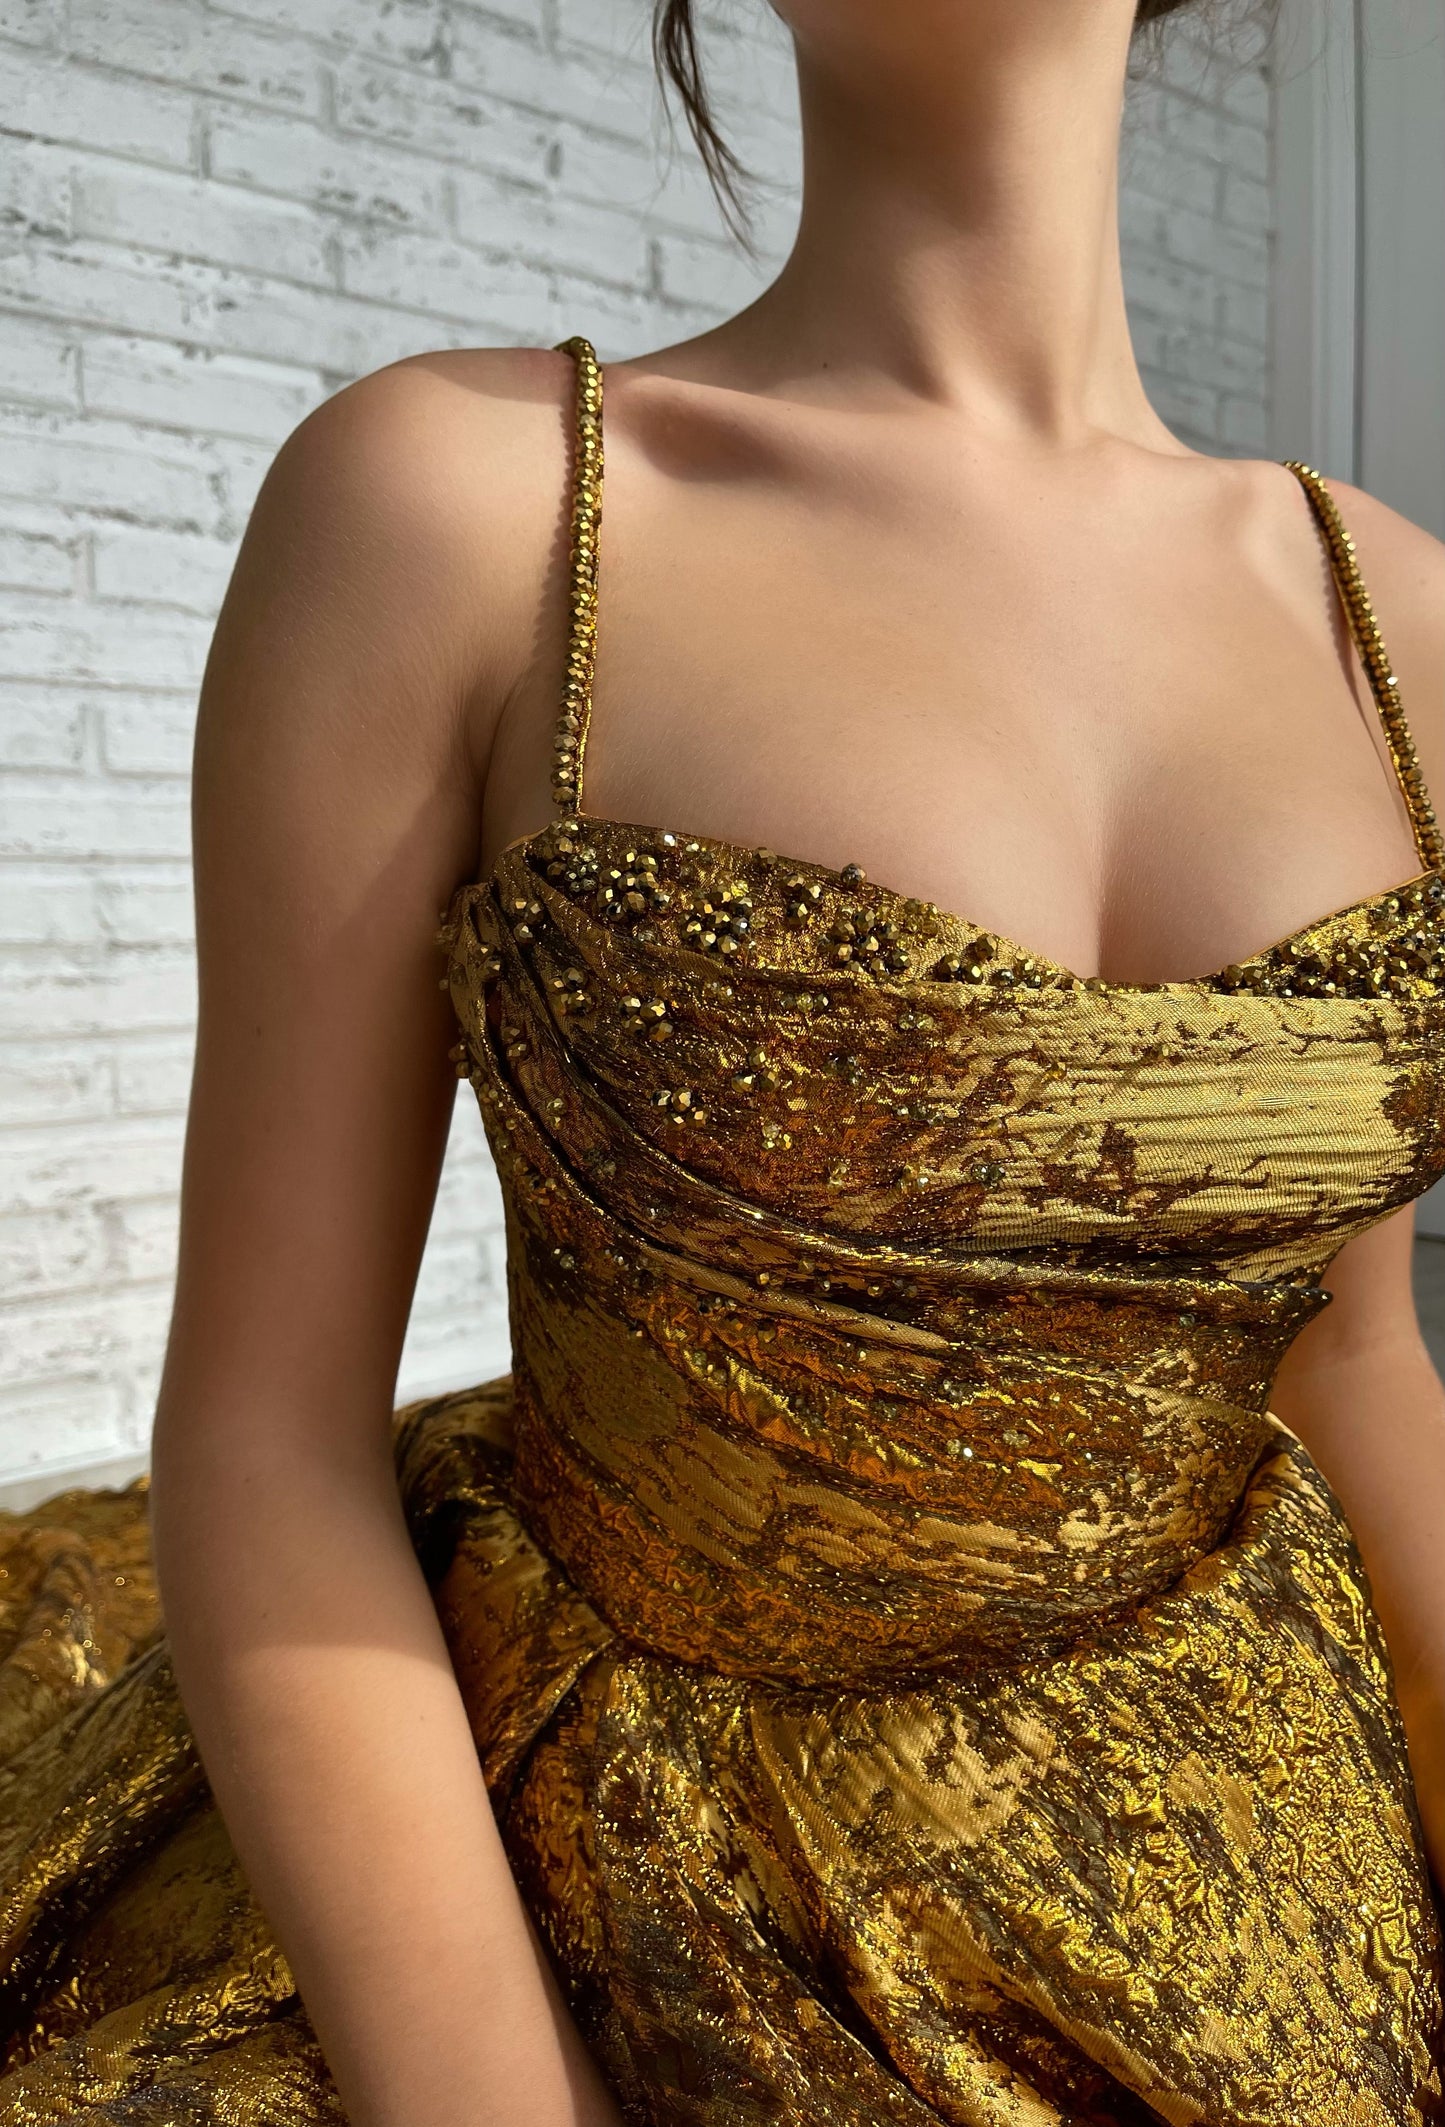 Gold A-Line dress with spaghetti straps and beading